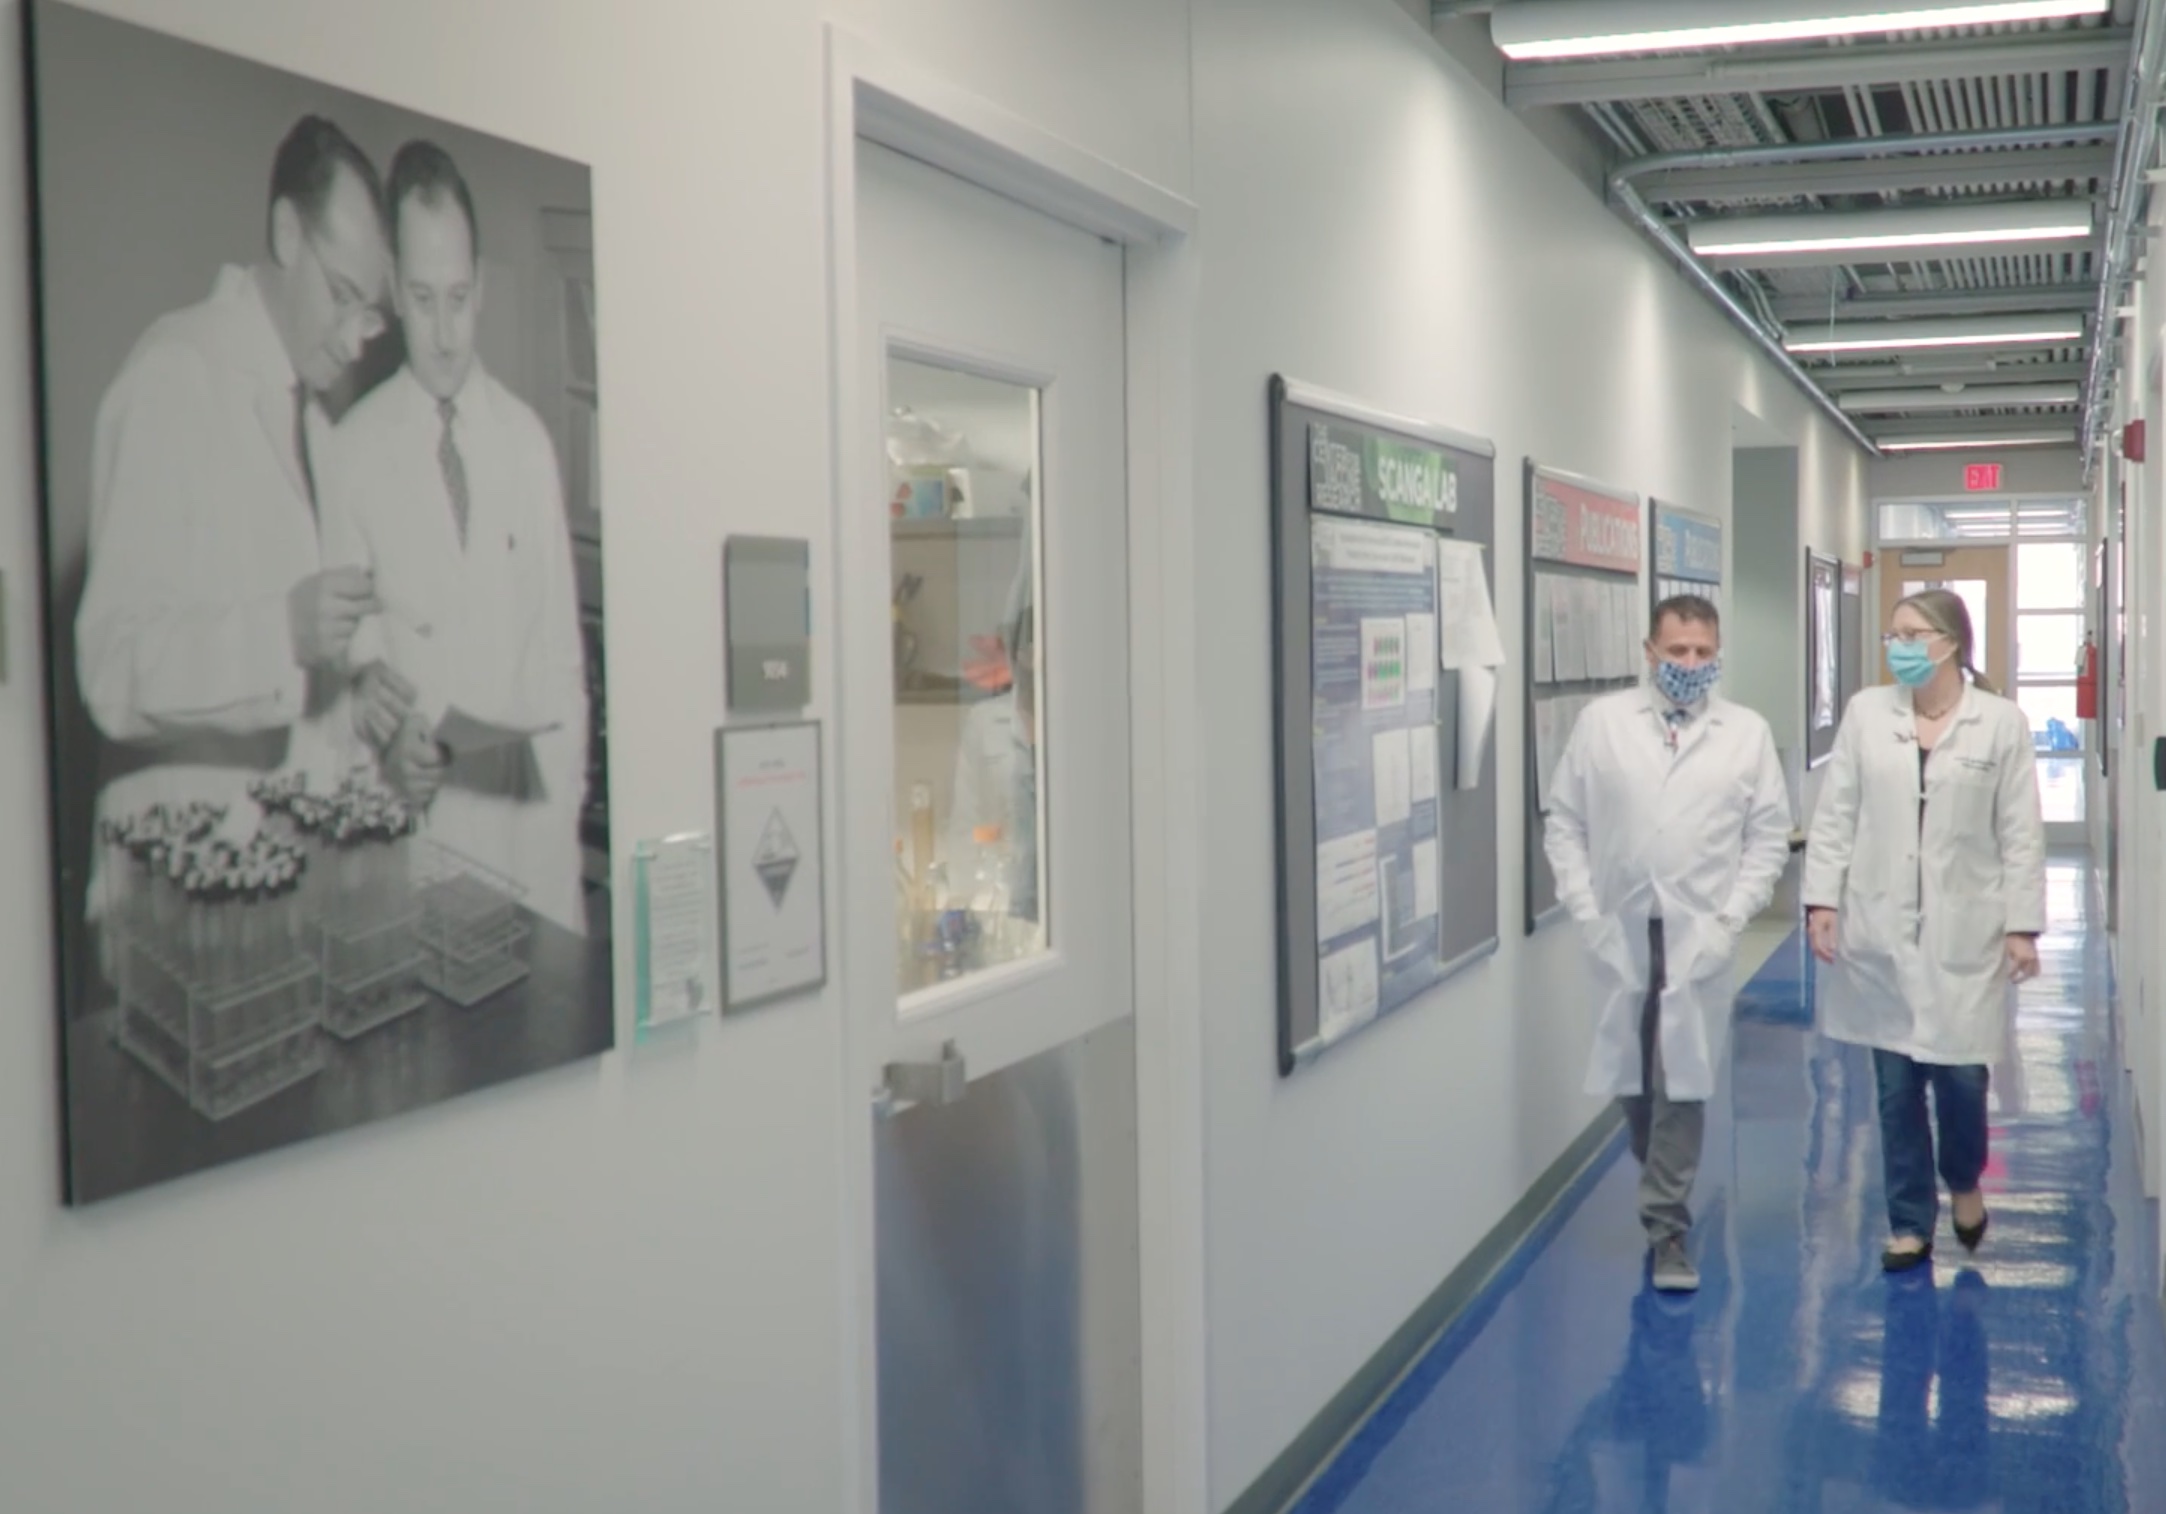 Chasing Covid: Inside the Vaccine Lab